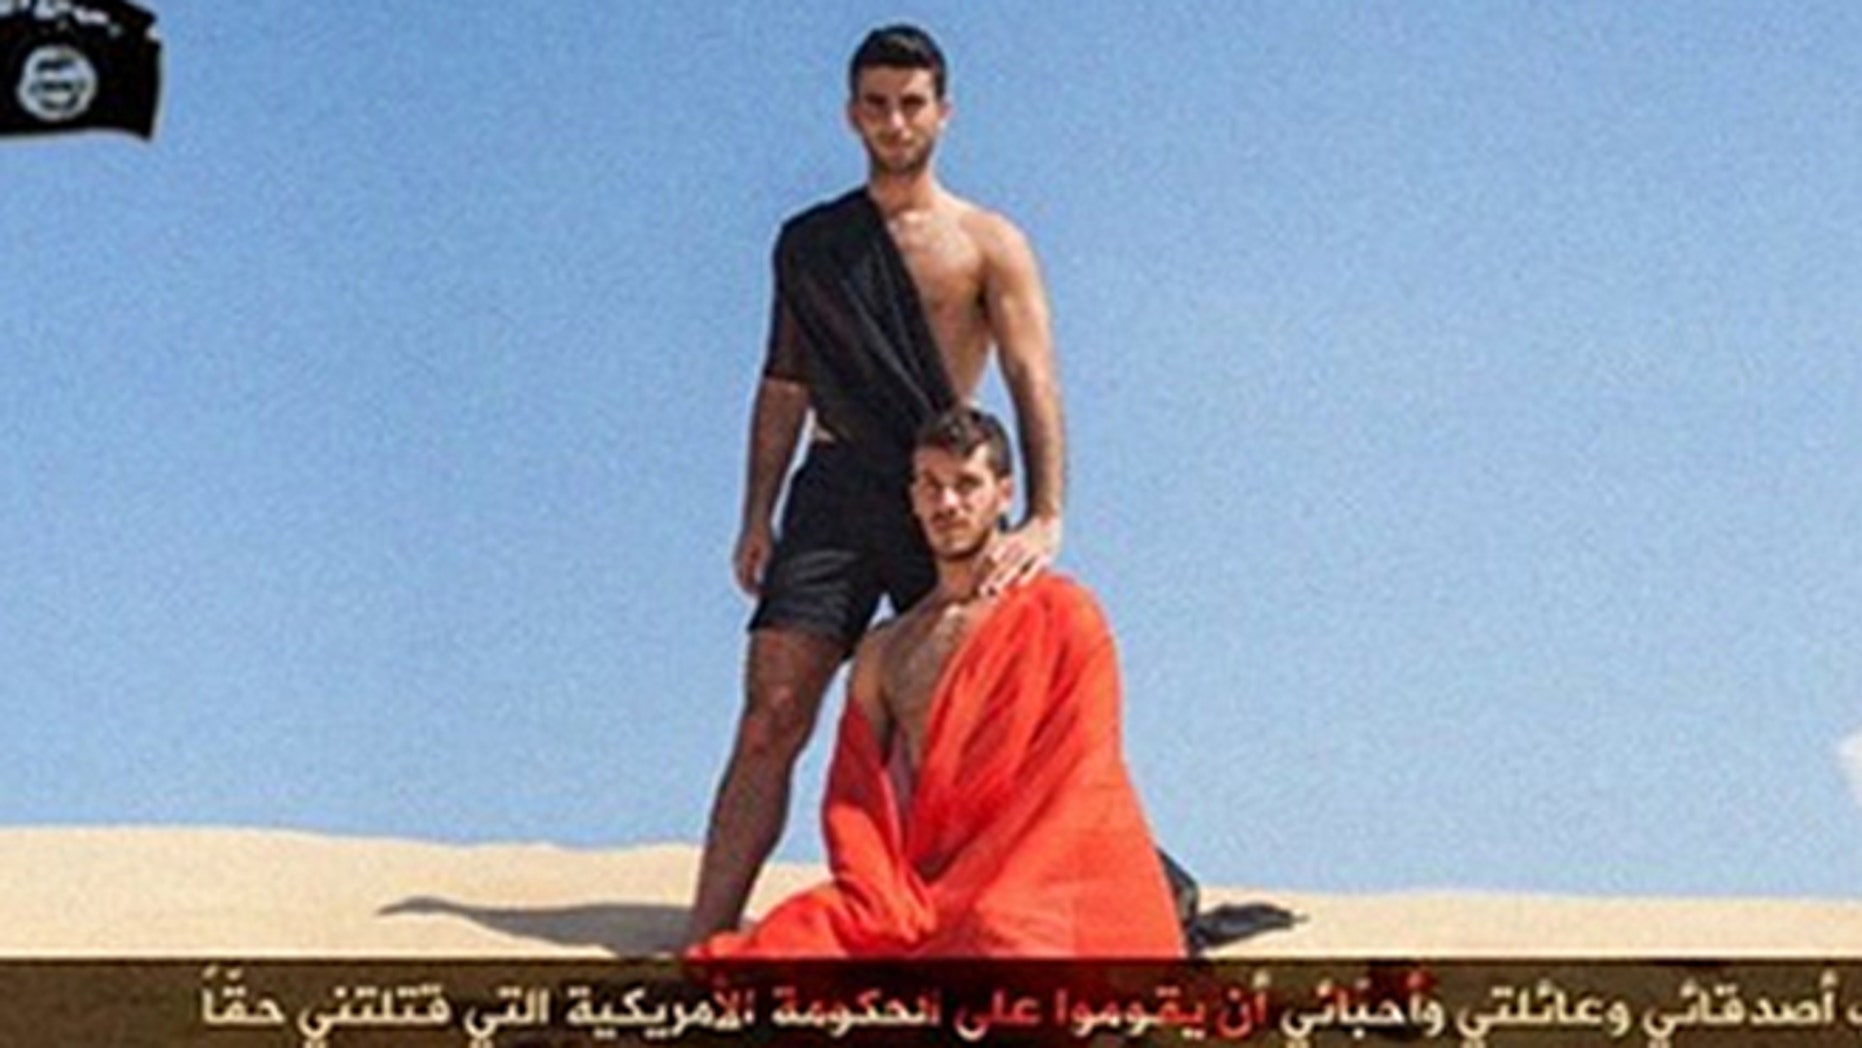 Israeli Gay Party Organizer Criticized For Using Isis Inspired Imagery 6532